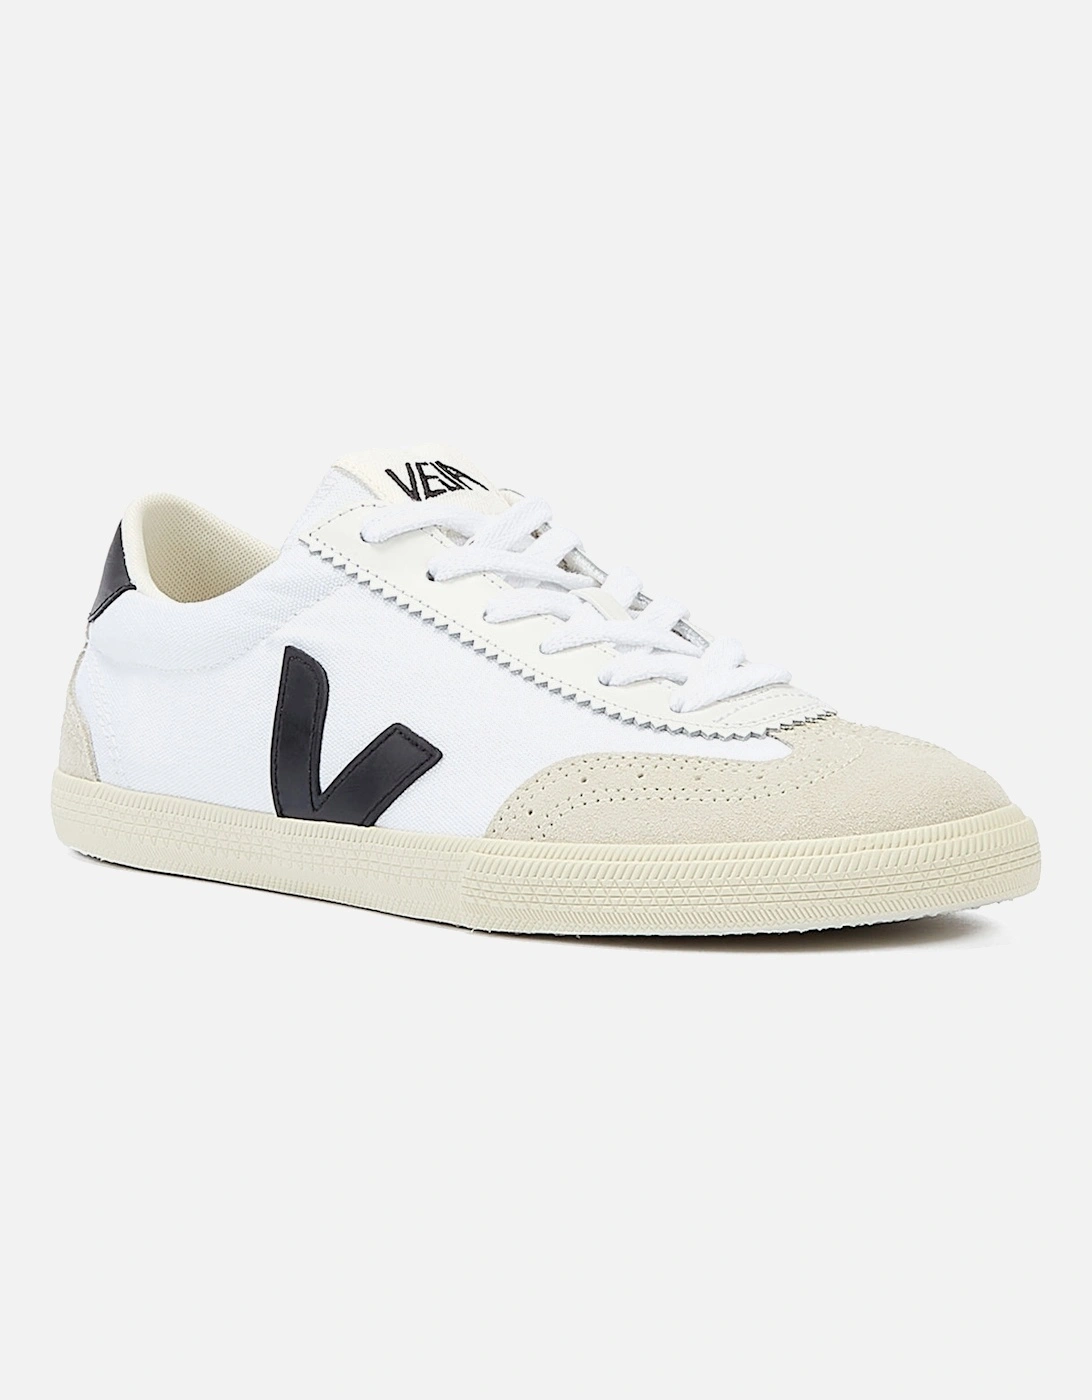 Volley Men's White/Black Trainers